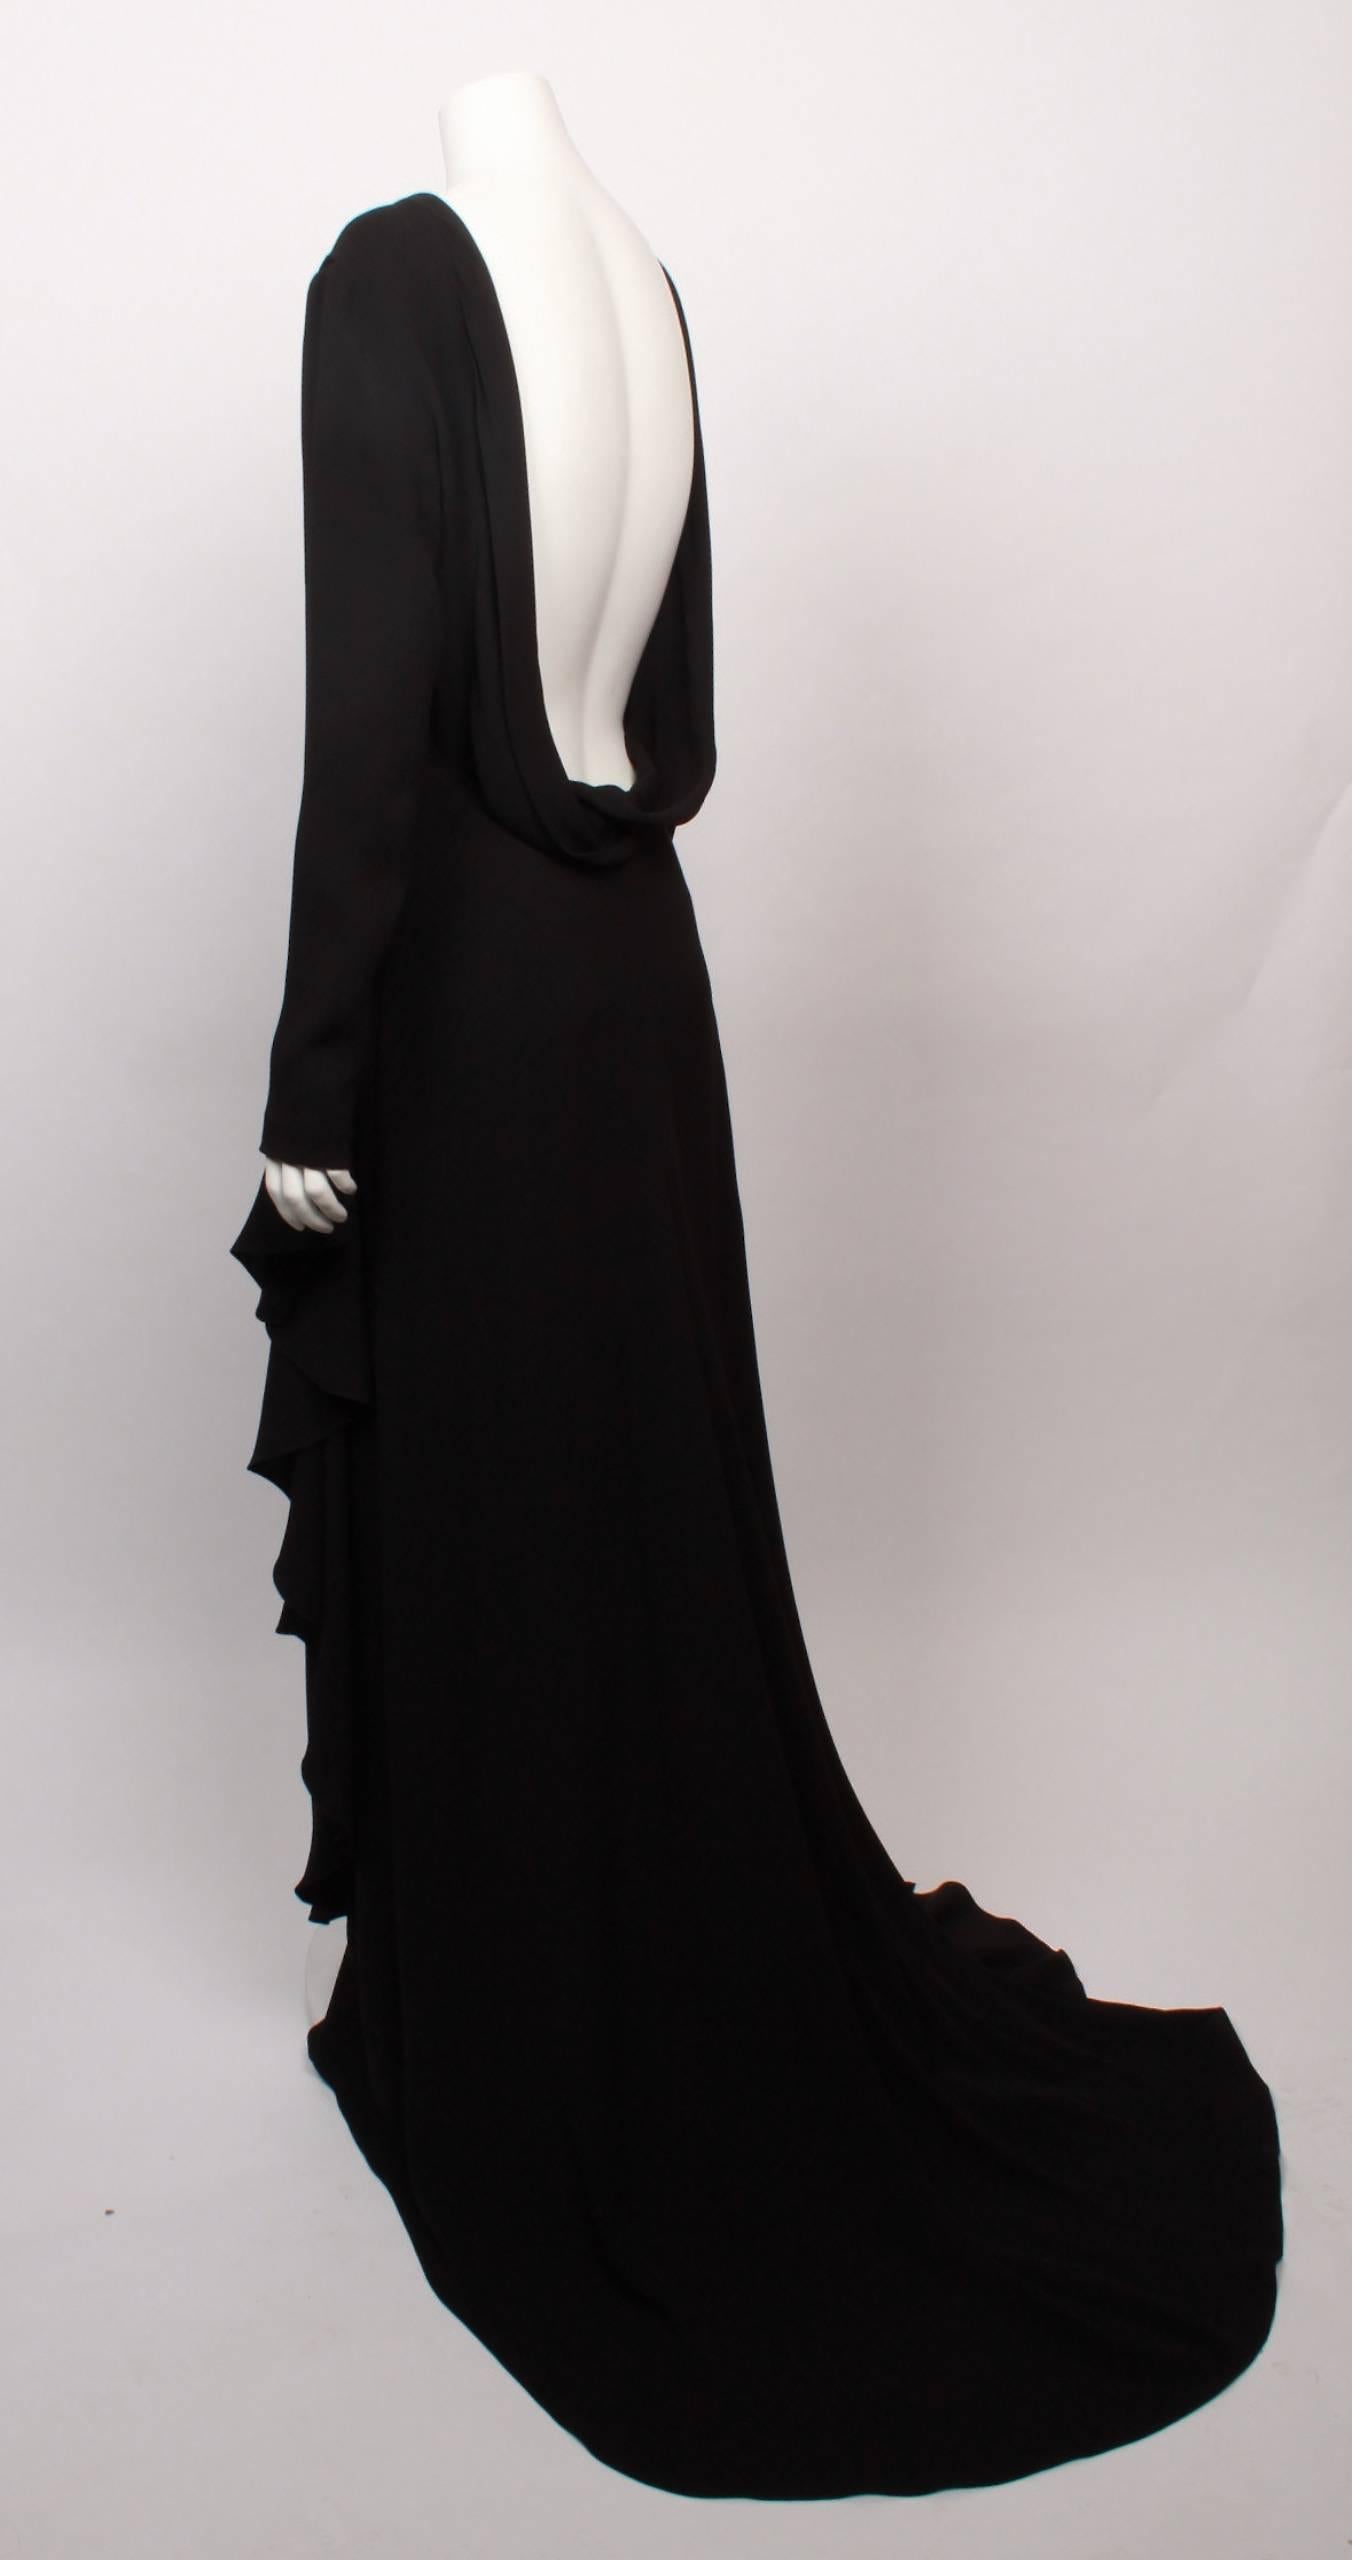 Amazing and elegant CHRISTIAN DIOR long sleeve backless black silk crepe Red Carpet evening gown. This item has never been worn and comes with original tag from Bergdorf Goodman attached showing US$7000 pre-tax.
The gown features a stunning and